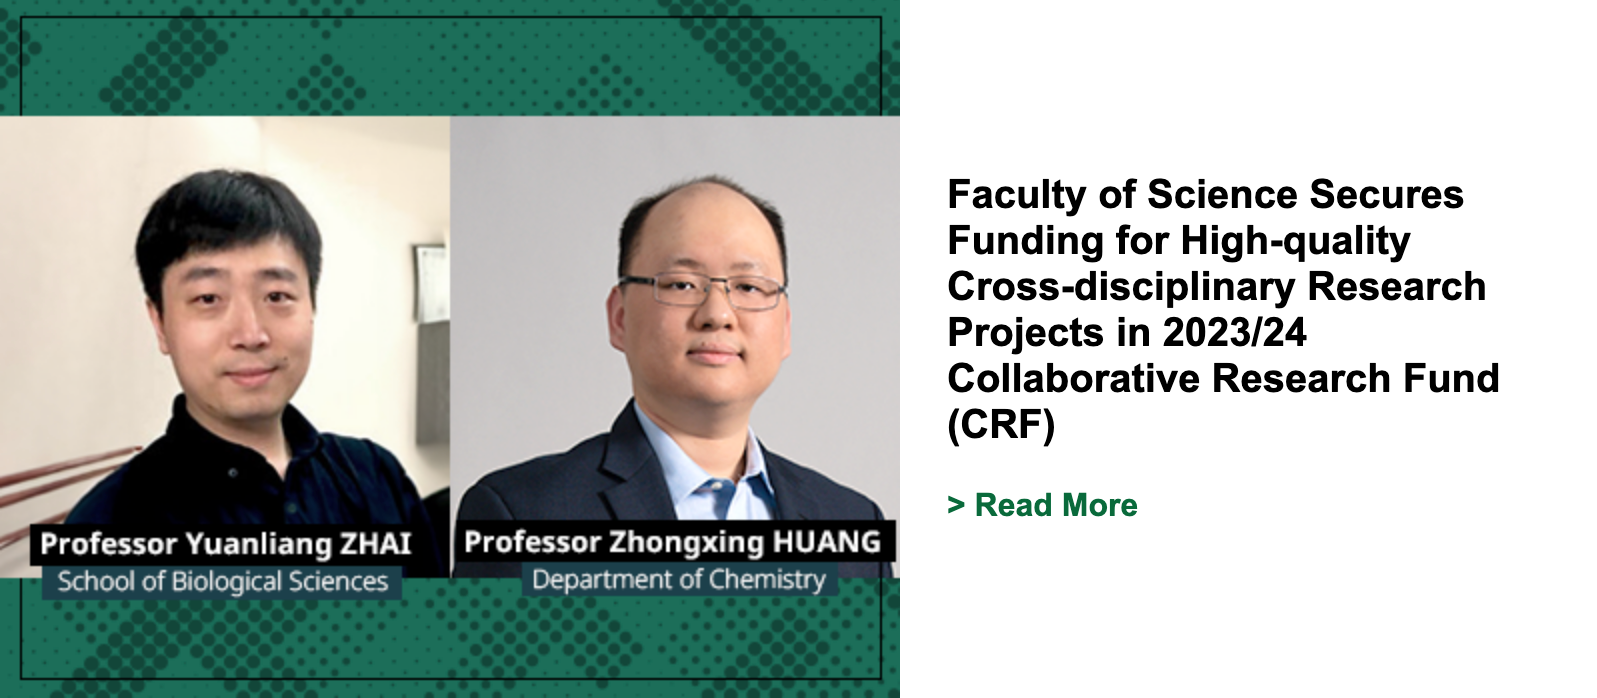 Faculty of Science Secures Funding for High-quality Cross-disciplinary Research Projects in 2023/24 Collaborative Research Fund (CRF)